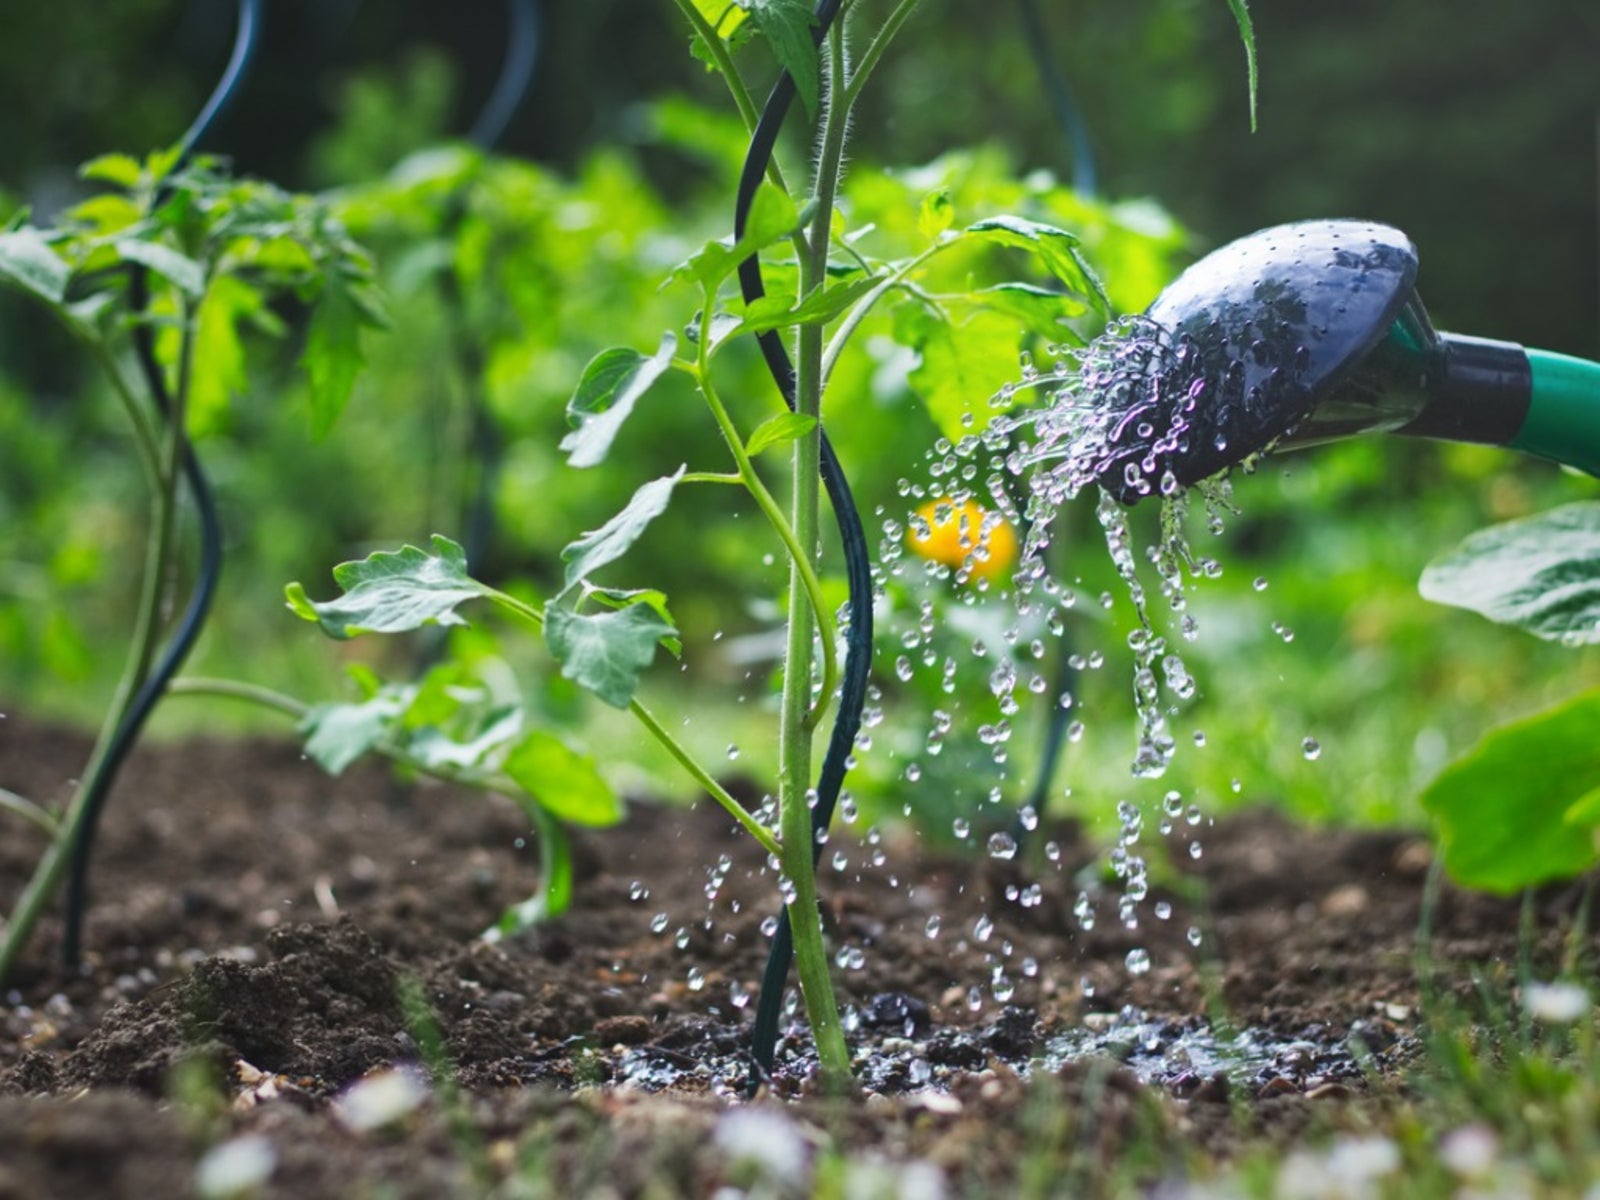 When To Water Plants: The Best Time To Water Vegetable Garden